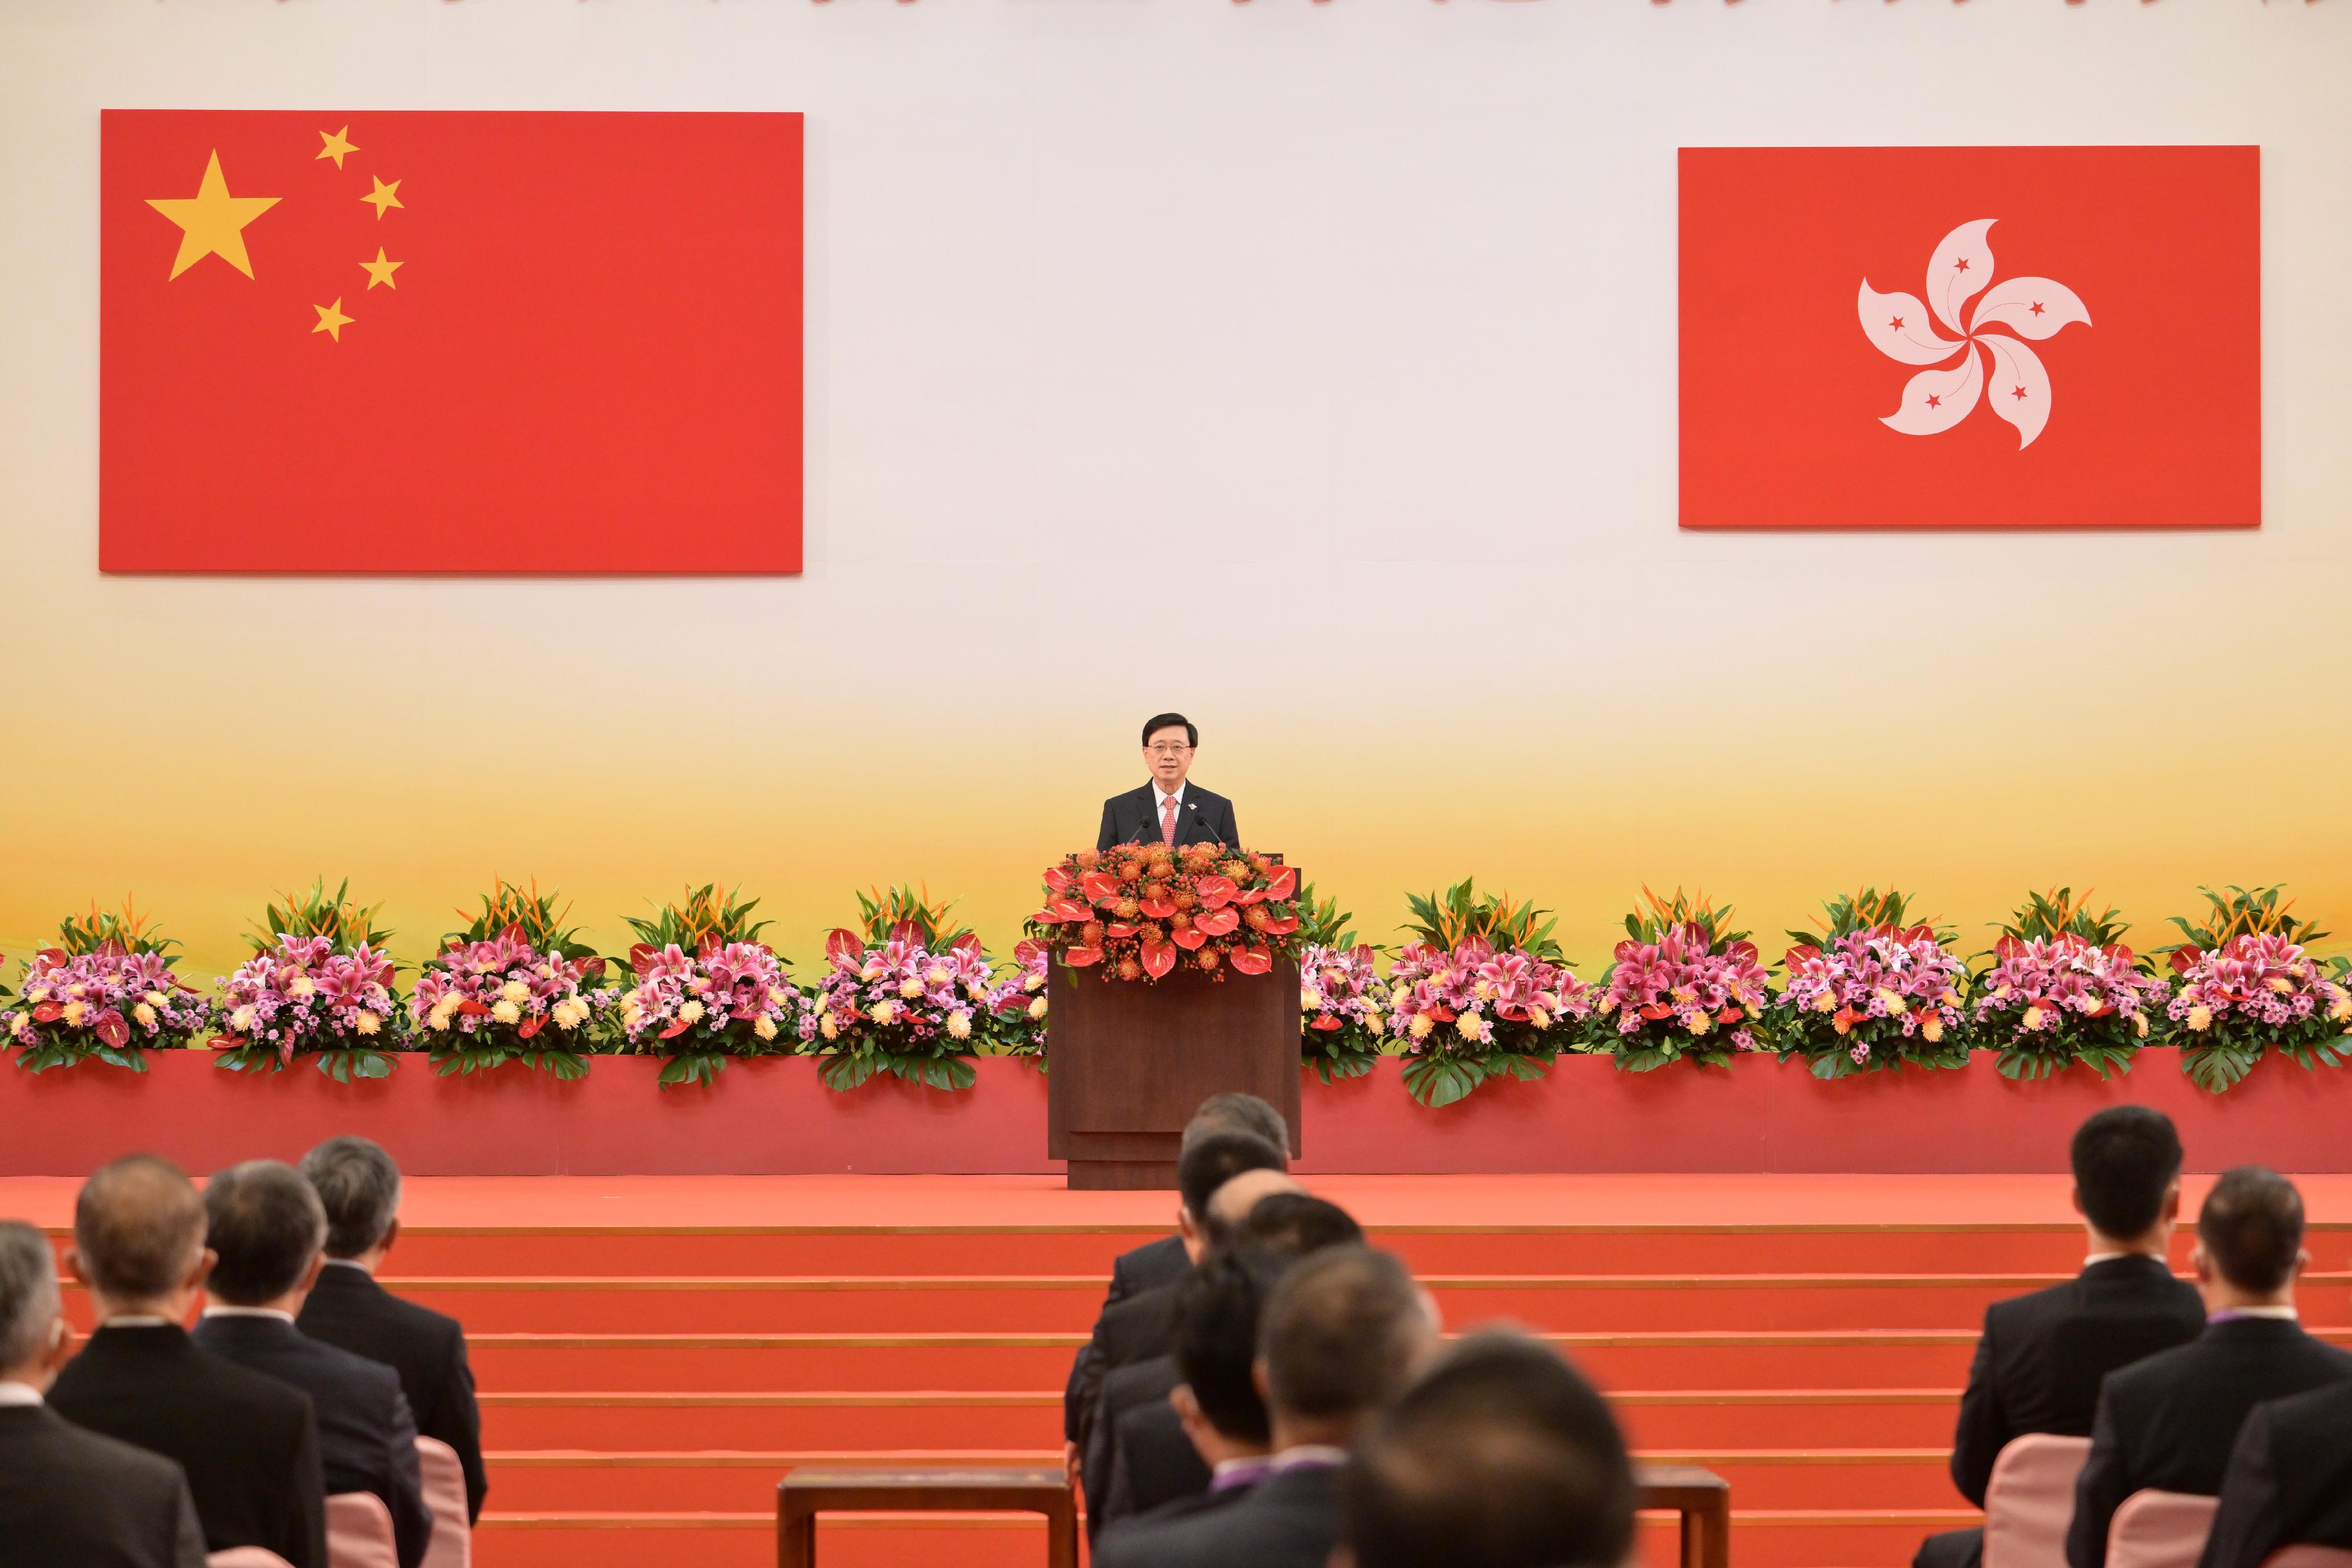 The Chief Executive, Mr John Lee, speaks at the Inaugural Ceremony of the Sixth-term Government of the Hong Kong Special Administrative Region at the Hong Kong Convention and Exhibition Centre this morning (July 1).